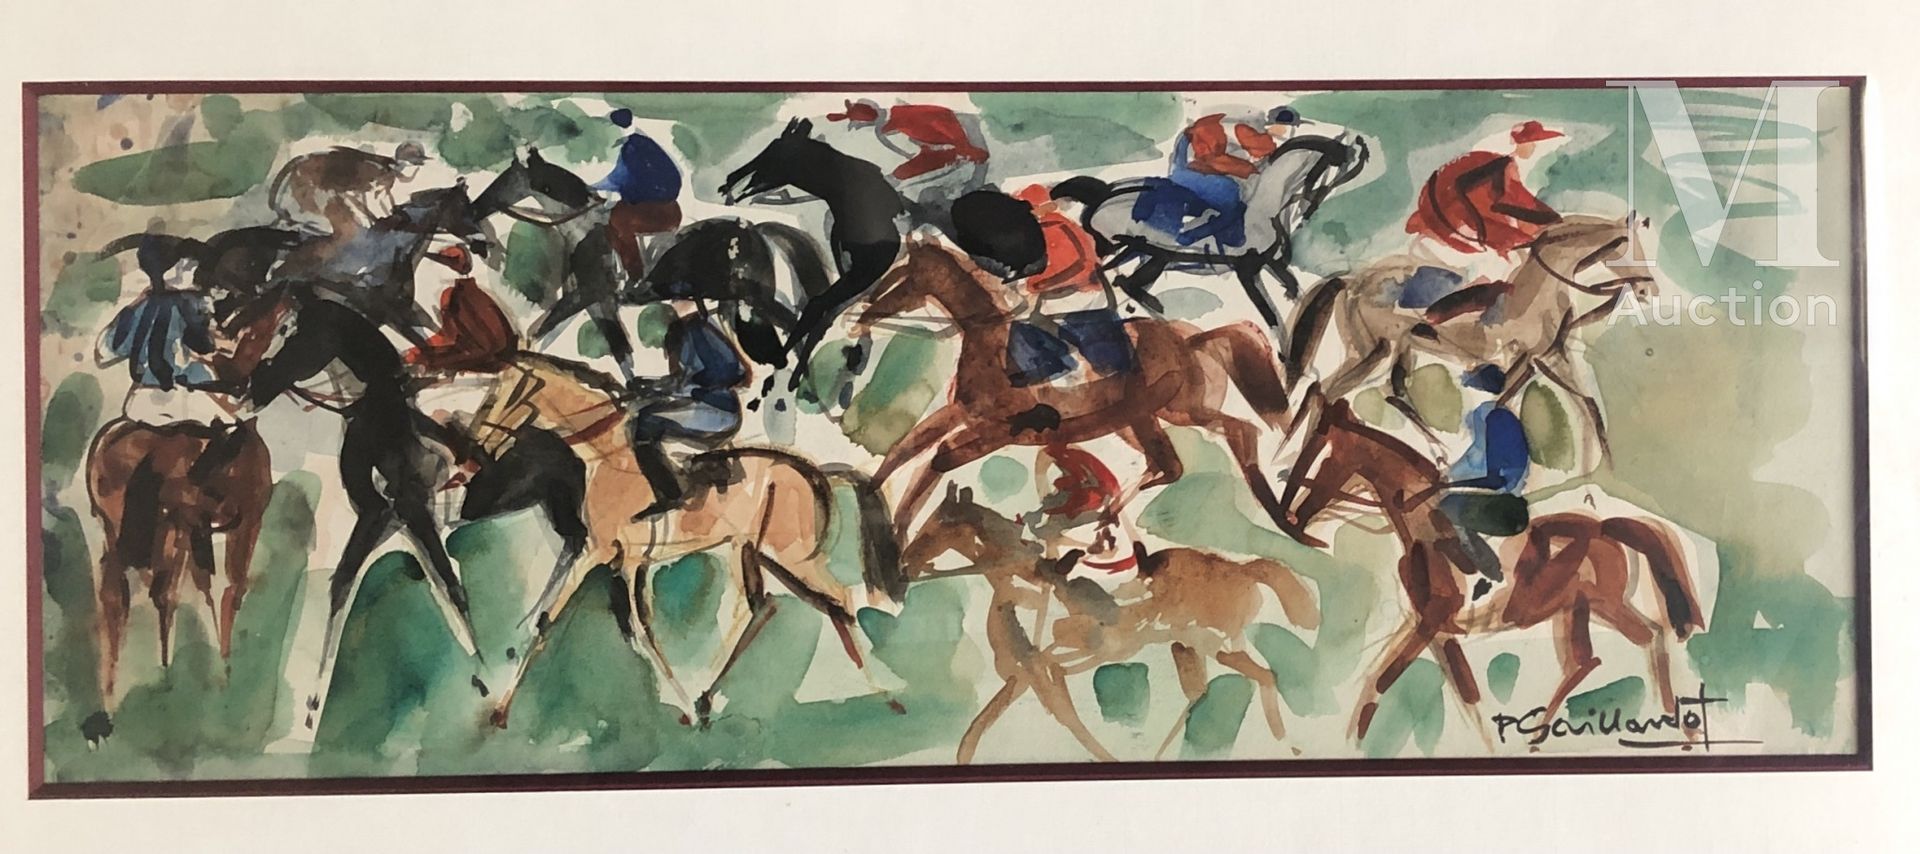 Pierre GAILLARDOT (1910-2002) The Polo Match

Watercolor on paper

Signed lower &hellip;